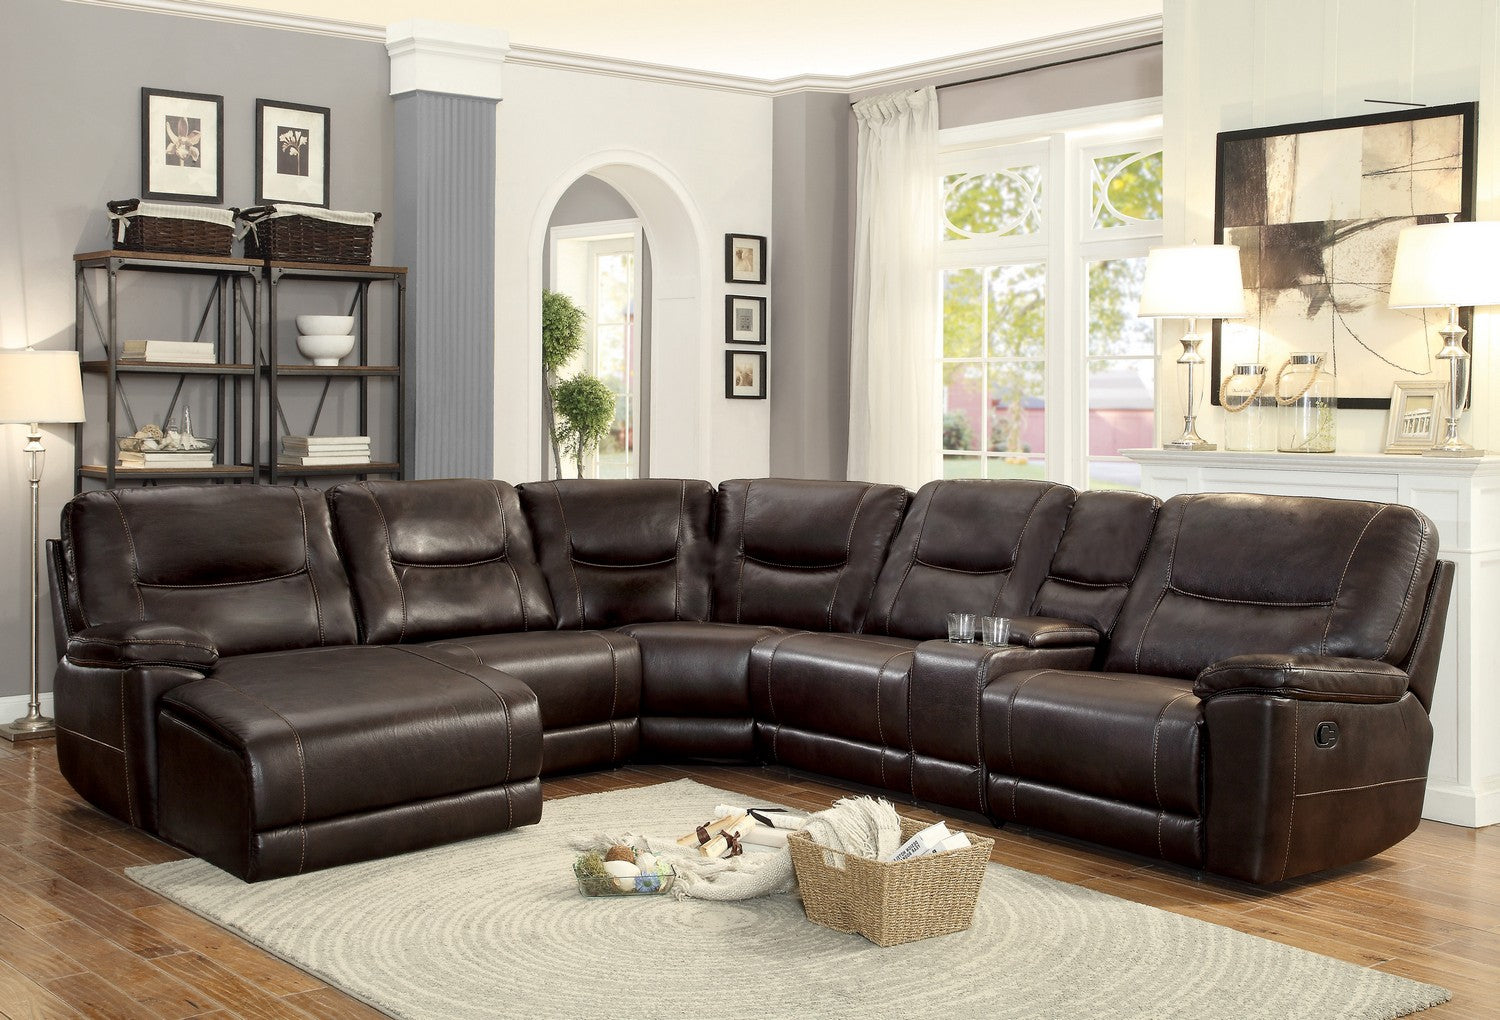 2pc sectional brown leather sofa